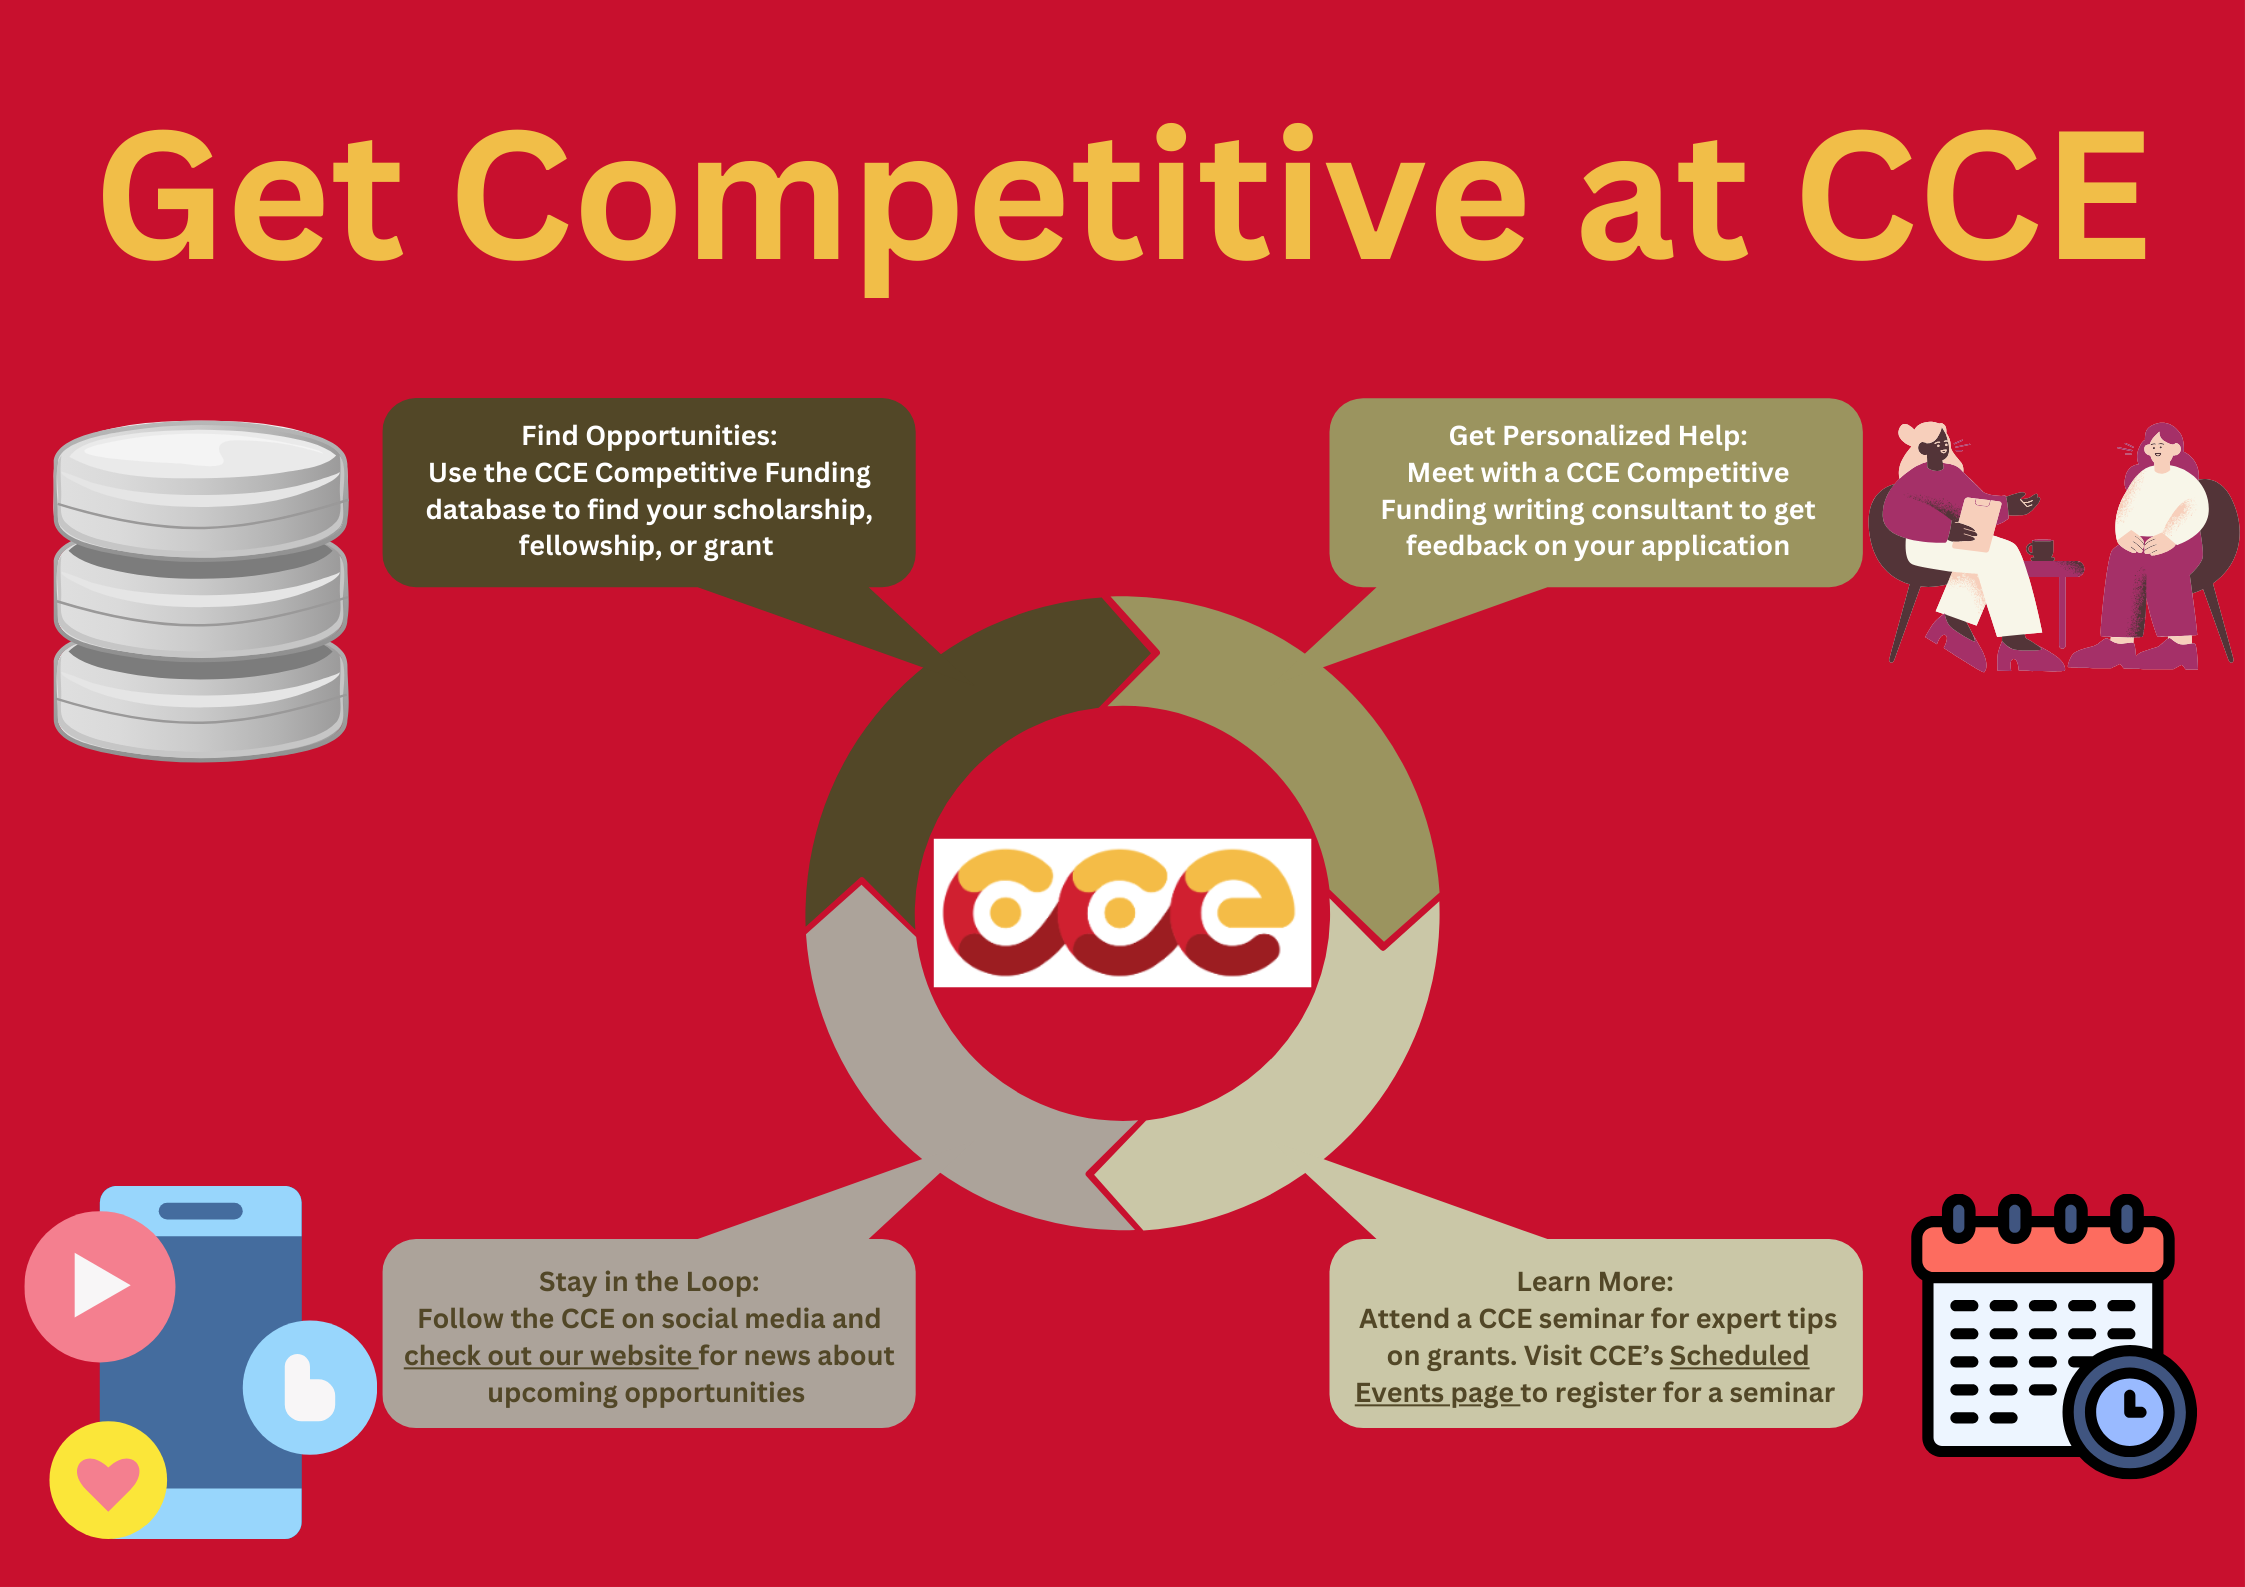 A bold title states, Get Competitive at CCE. The CCE logo is at the center of a 4-part cycle. At the top left, a database icon beside the text, 'Find opportunities: Use the CCE Competitive Funding database to find your scholarship, fellowship, or grant. At the top right, an illustration of two women in conversation with the words, 'Get personalized help: Meet with a CCE Competitive Funding writing consultant to get feedback on your application.' At the bottom right, a calendar icon with the text, "Learn more: Attend a CCE seminar for expert tips on grants. Visit CCE's Scheduled Events page to register for a seminar.' At the bottom right, a smartphone icon with the text, 'Stay in the loop: Follow the CCE on social media and check out our website for news about upcoming opportunities.'